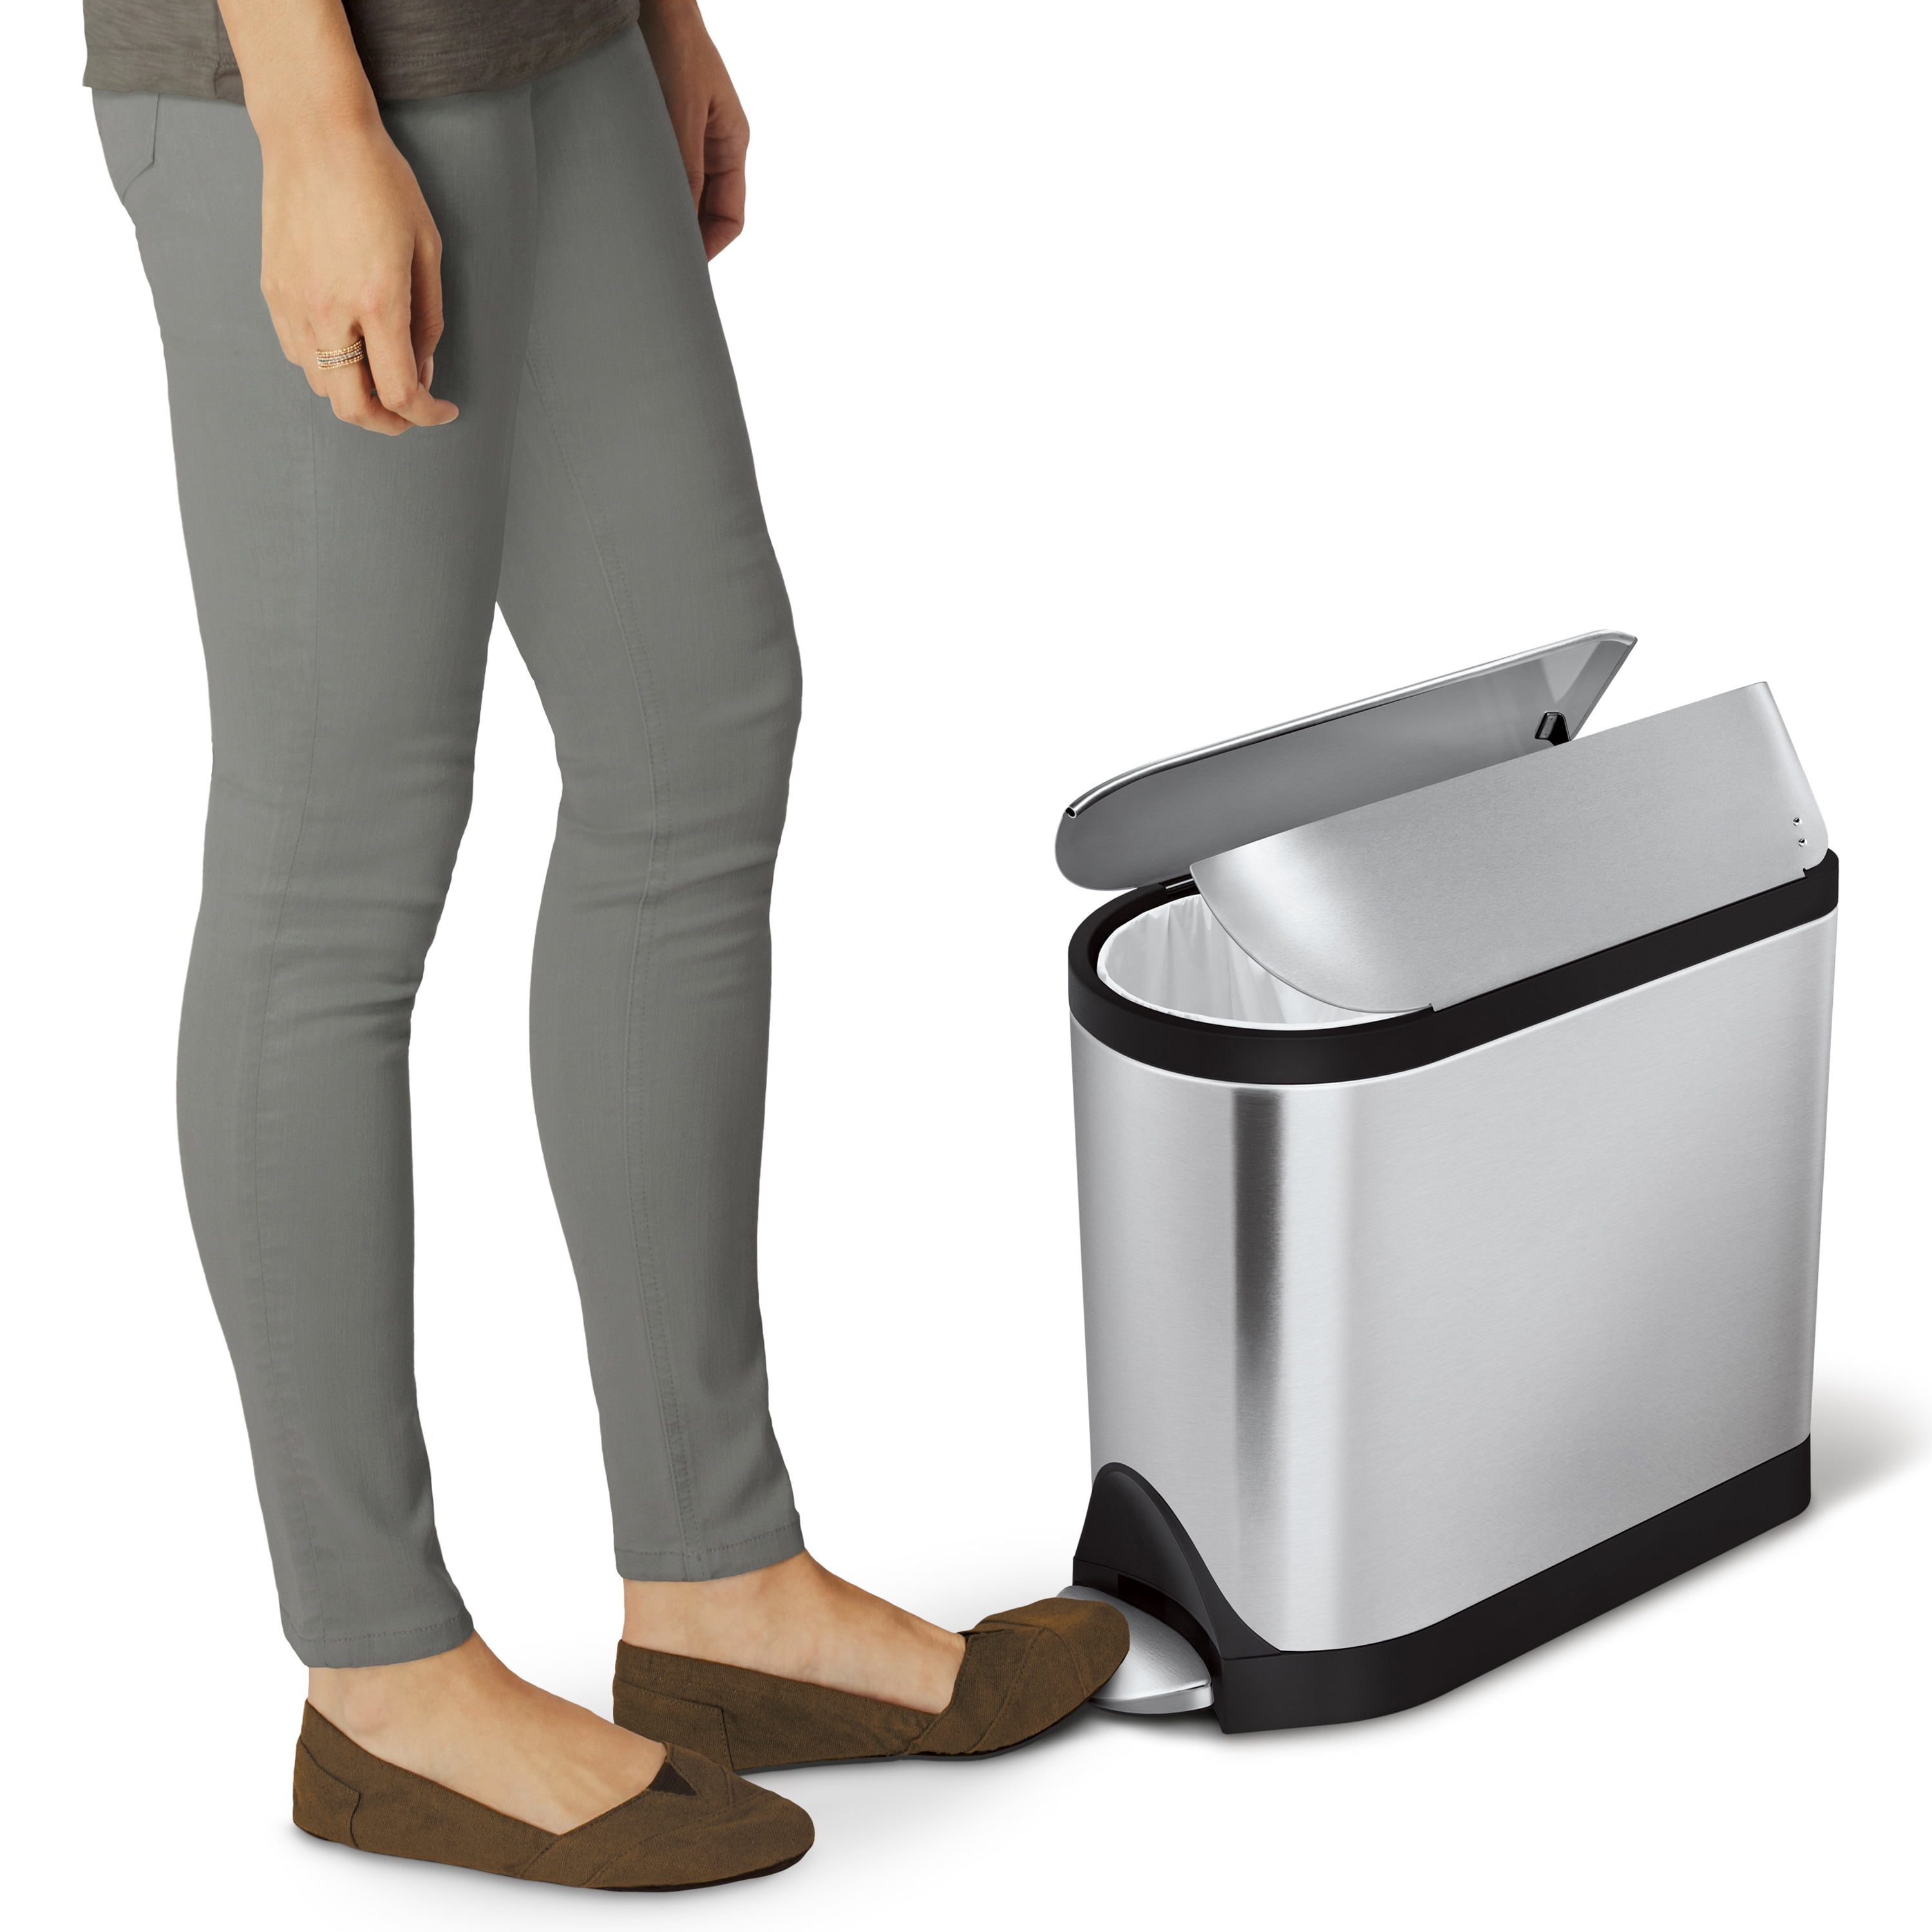 simplehuman CW2042 2.6 Gallon / 10 Liter White Stainless Steel Rectangular  Butterfly Step-On Trash Can